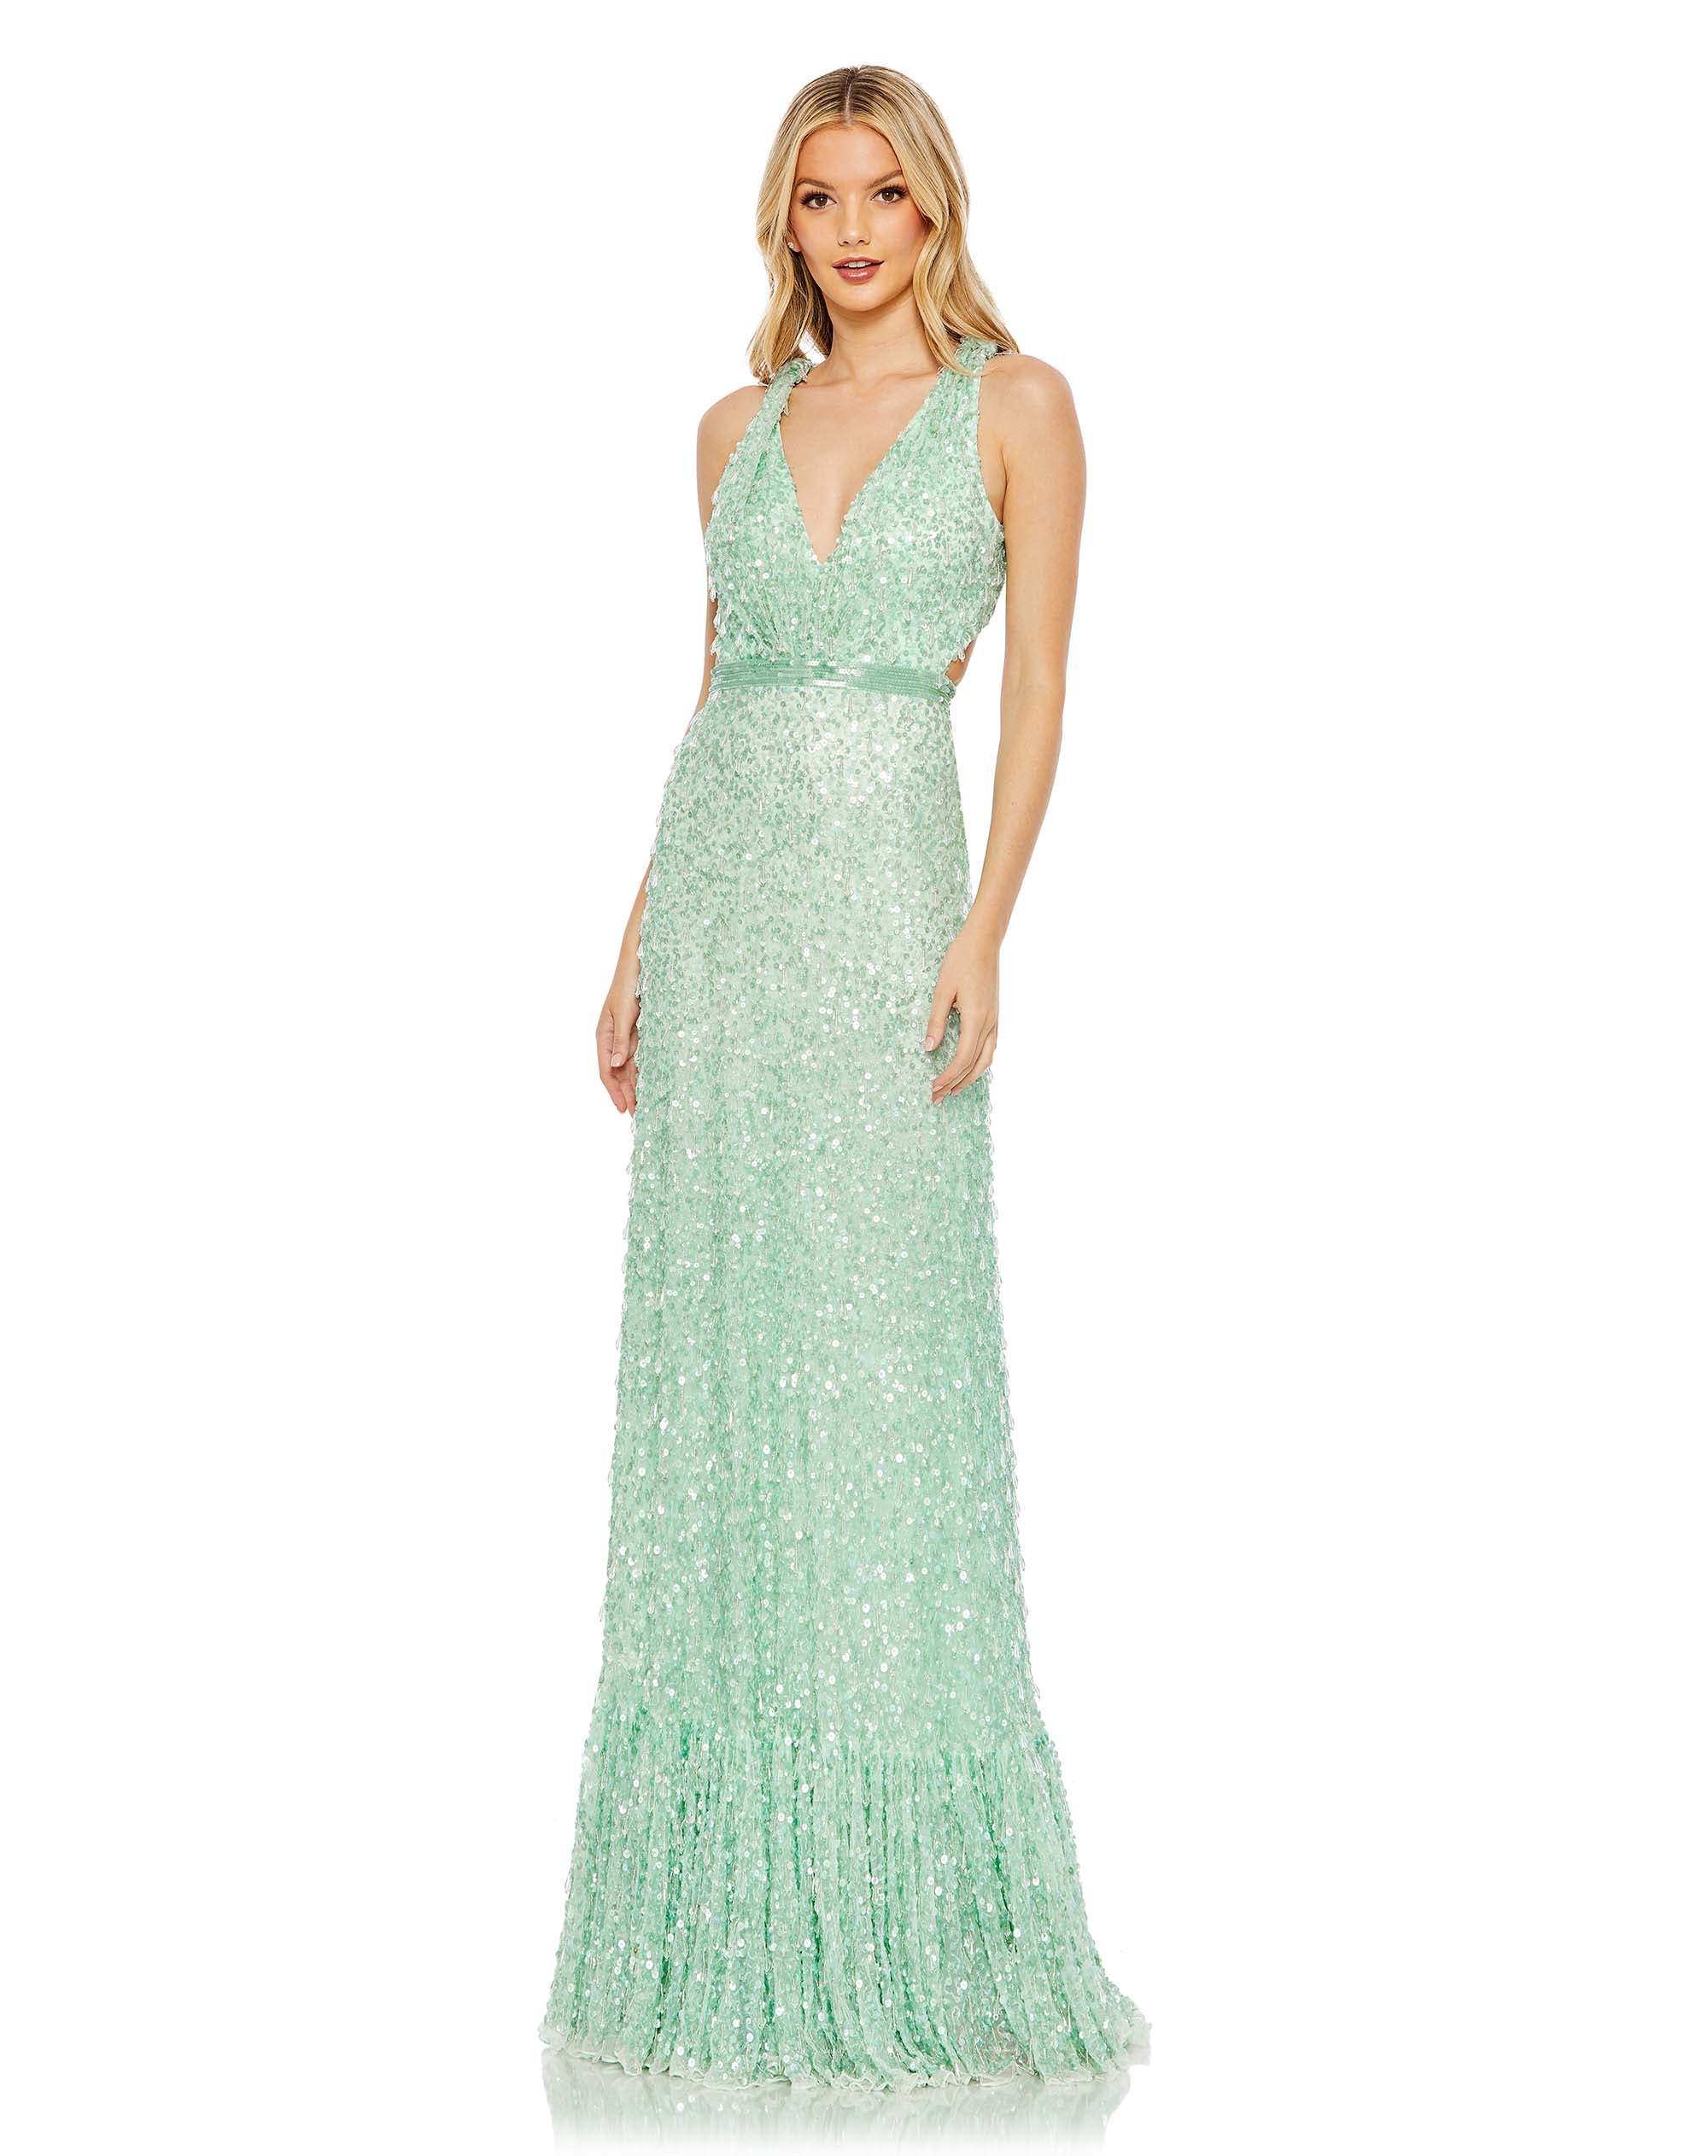 Crystal Embellished Sleeveless Cut Out A Line Gown  | Sample | Sz. 4